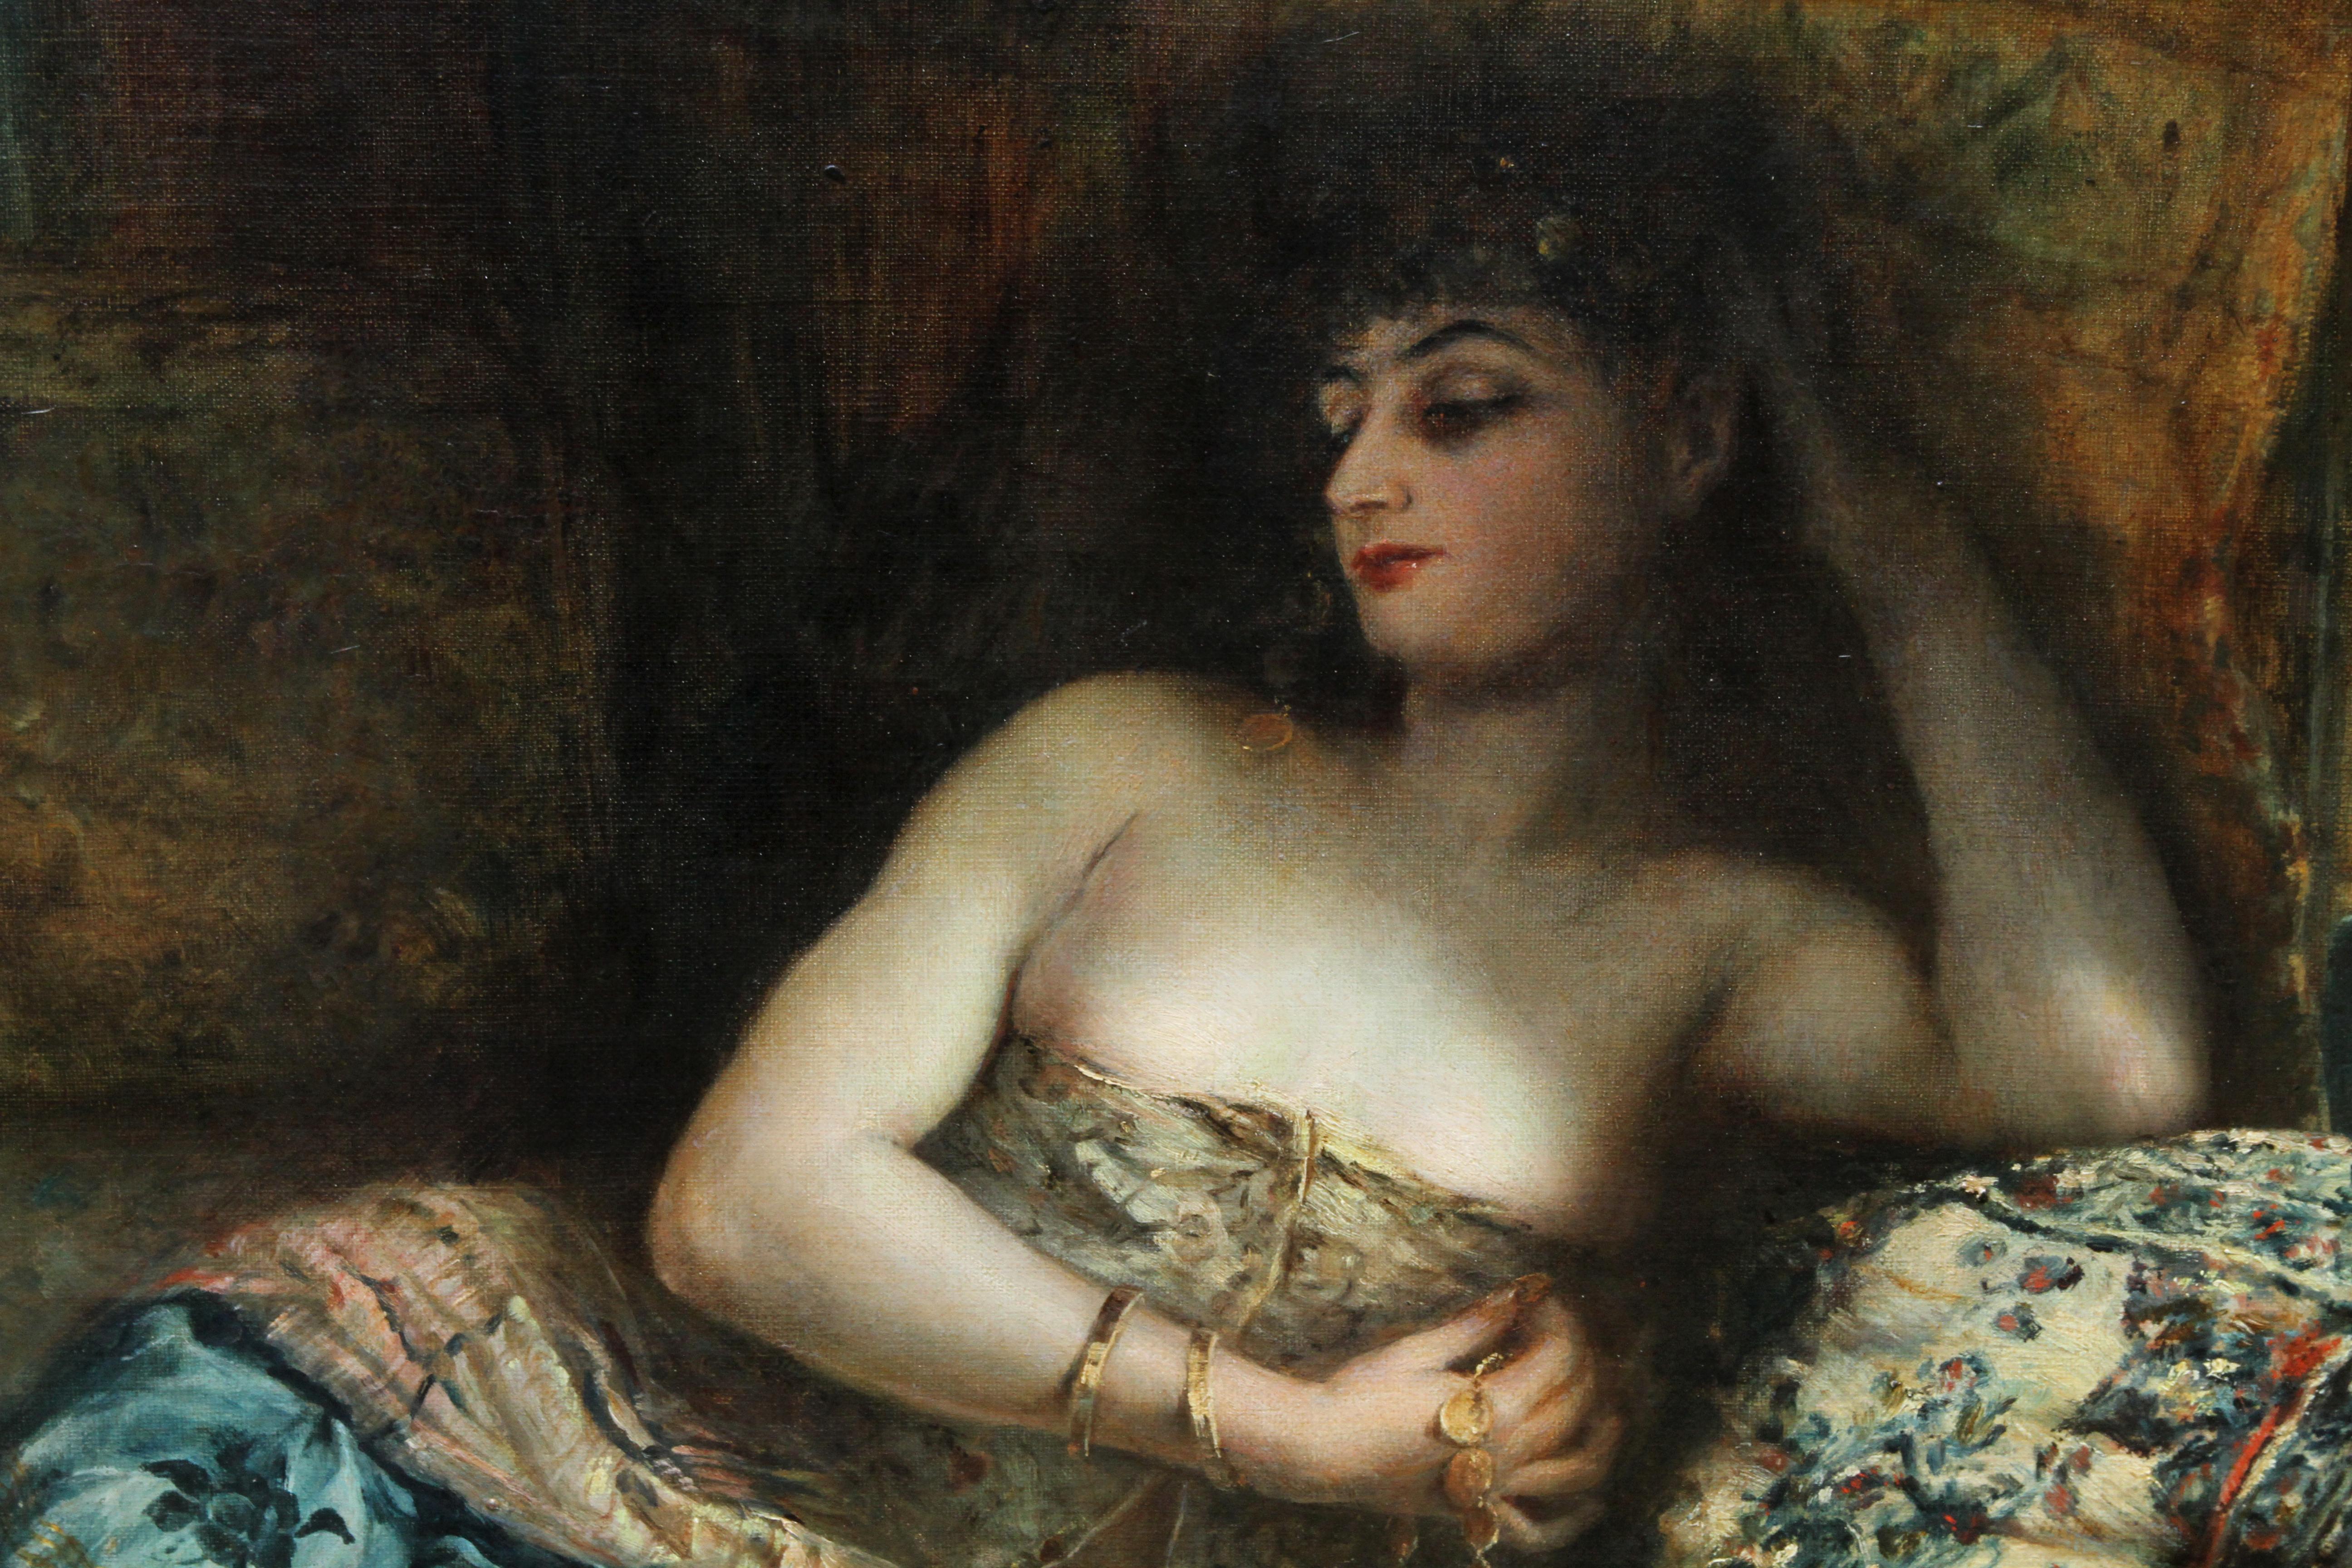 Odalisque - Woman in a Harem - French 1900 Orientalist art portrait oil painting For Sale 1